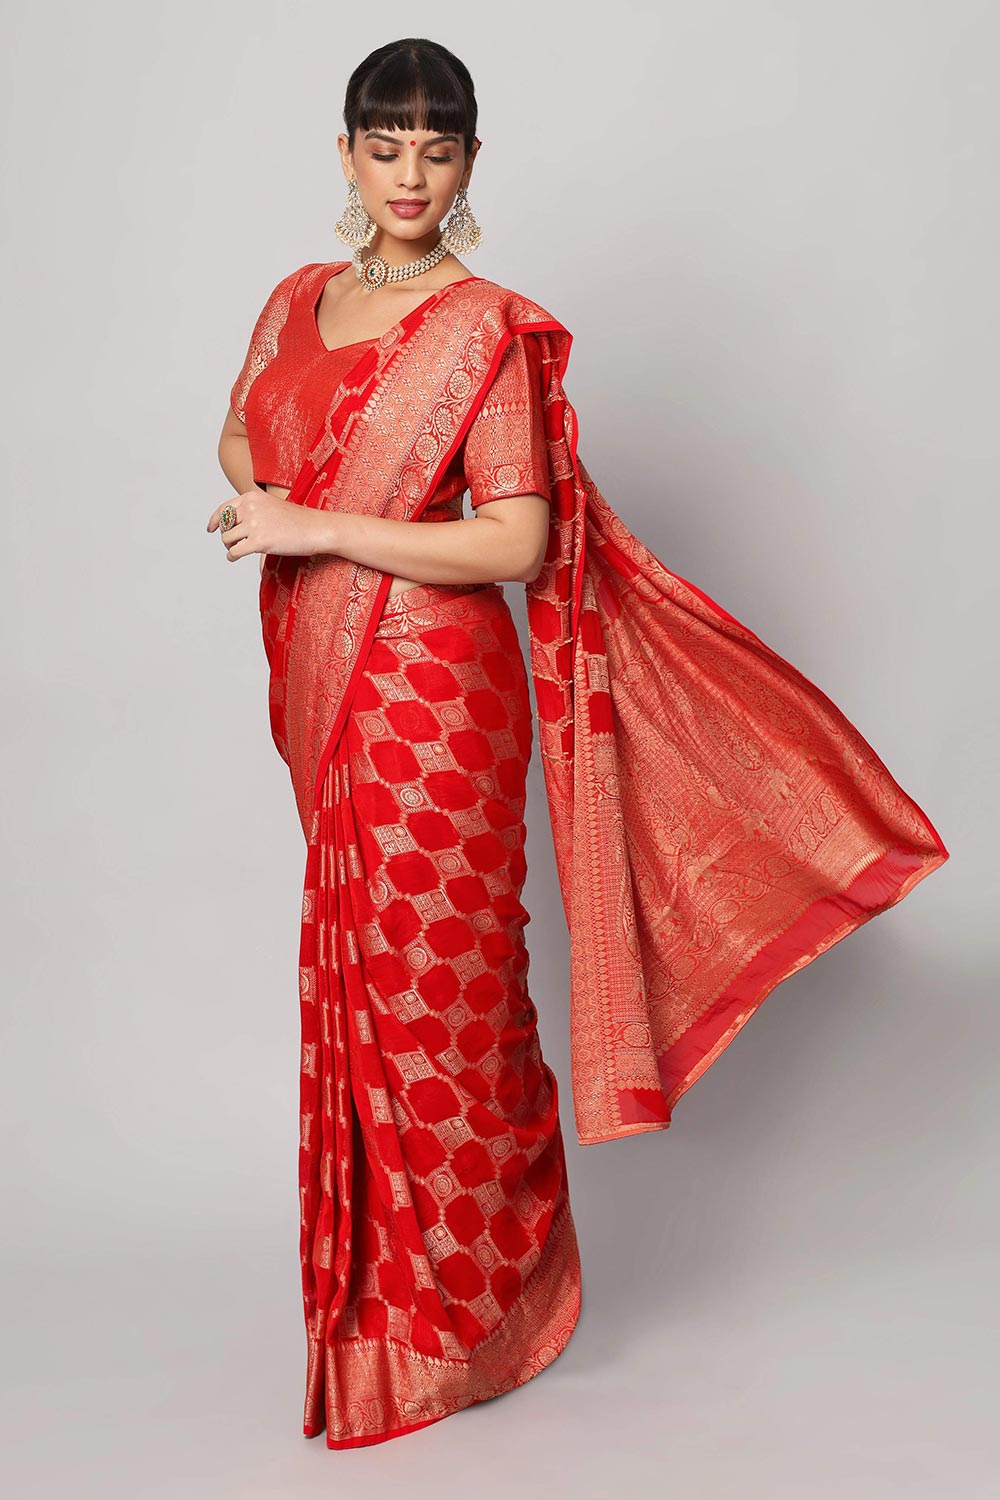 Jiva Red Gold Embroidered Georgette One Minute Saree